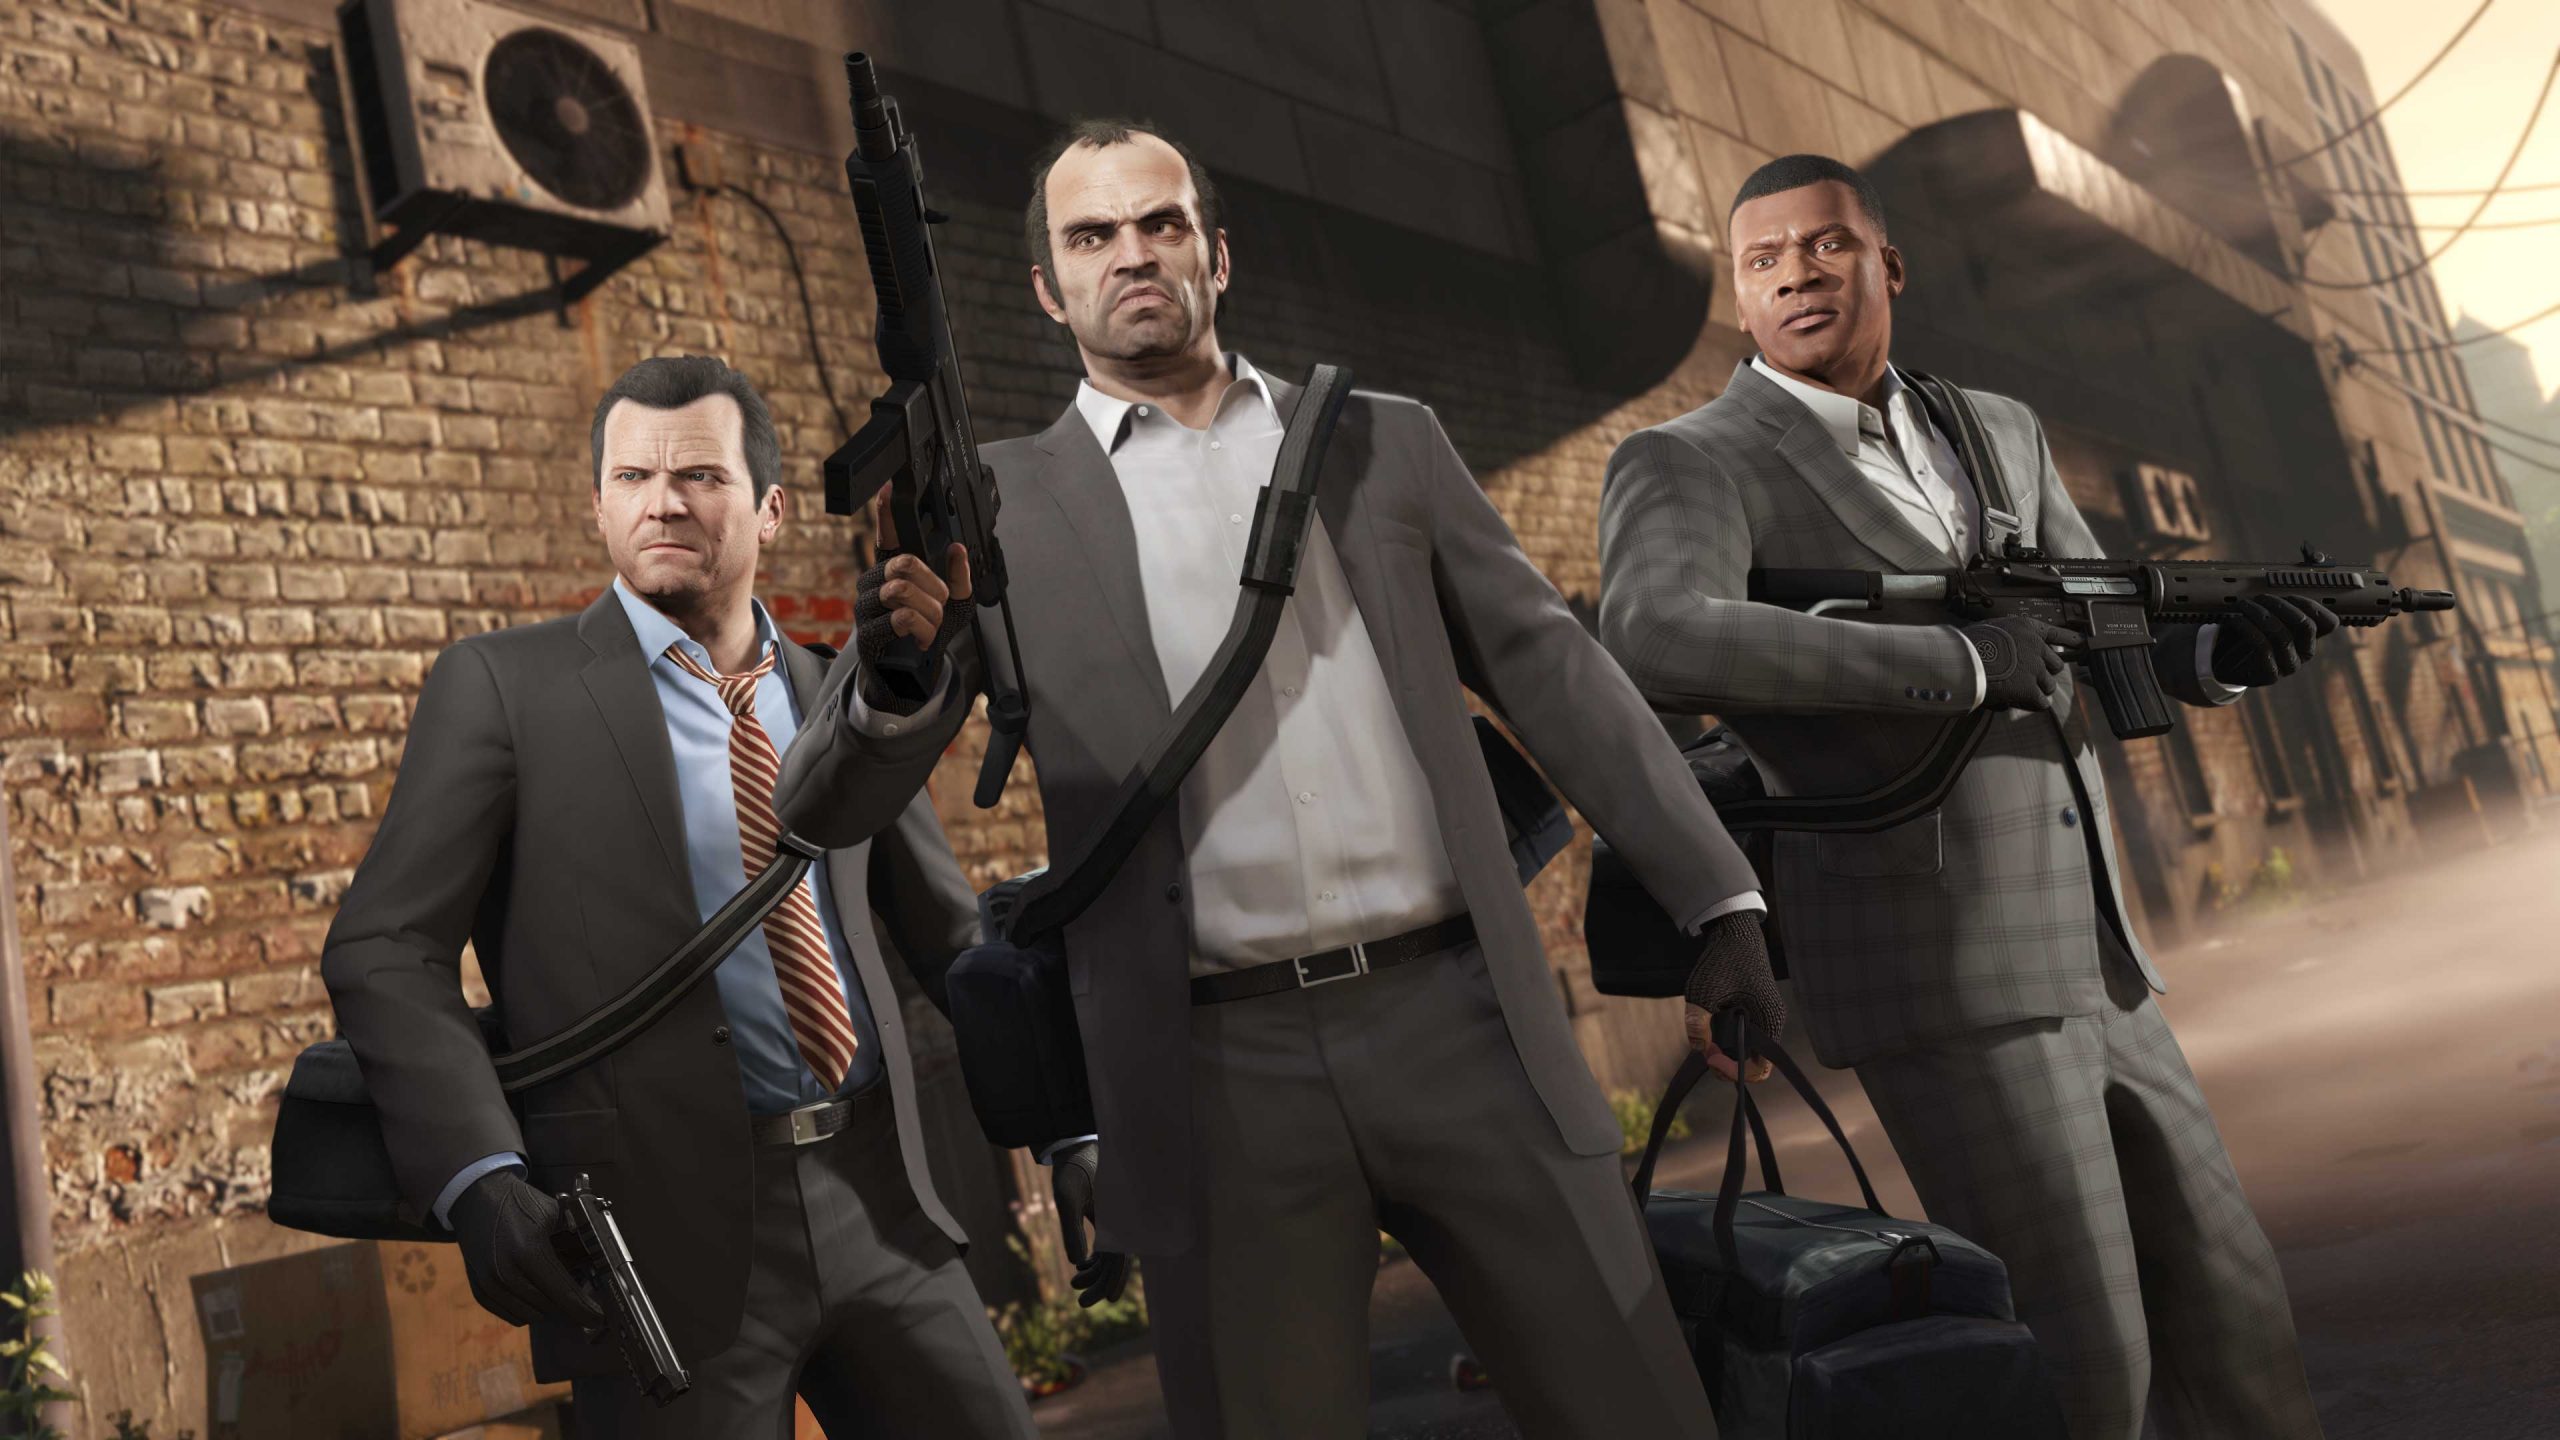 Grand Theft Auto 5 Online Heists Revealed, Trailer and Screenshots - Xbox  Gaming - WeMod Community